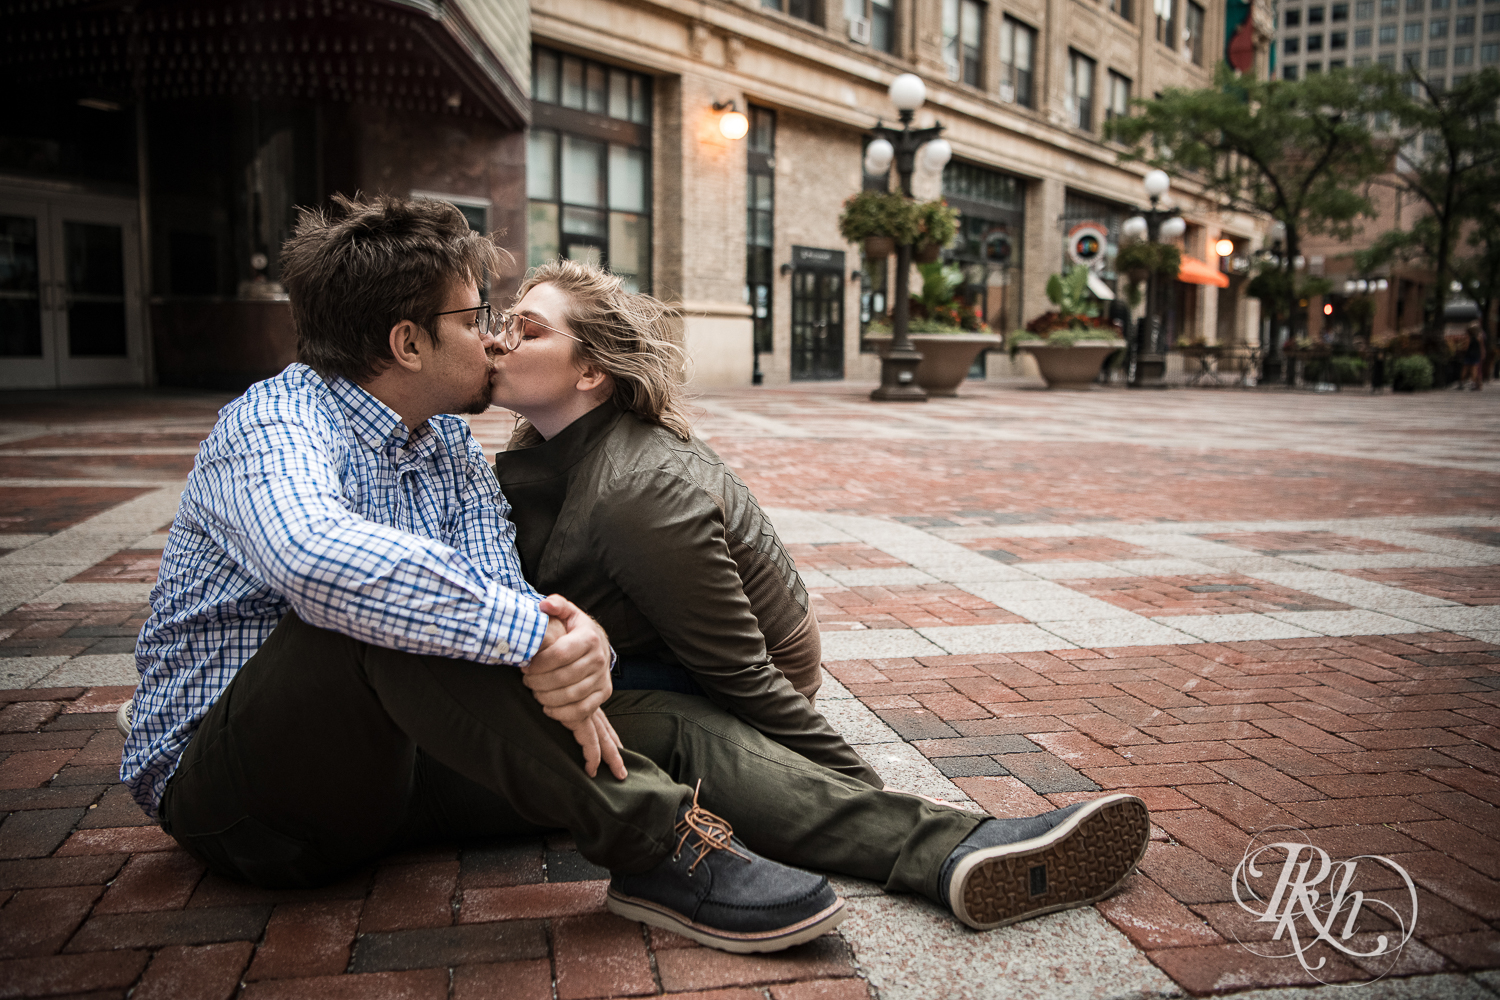 Blond woman with glasses and man with glasses kiss in front of the Palace Theater in Saint Paul, Minnesota.